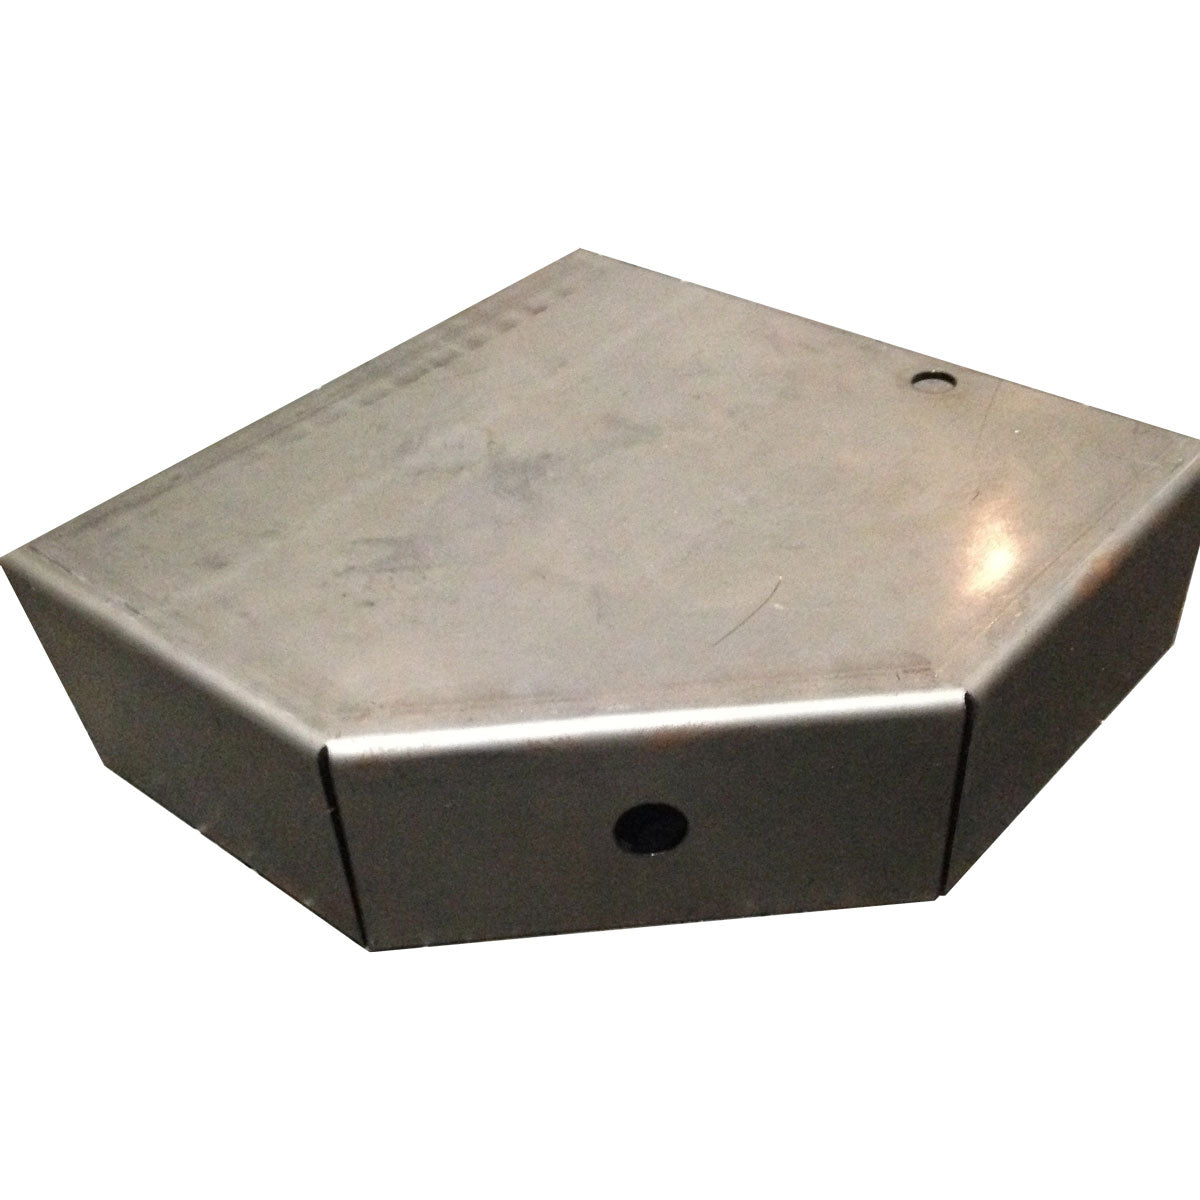 Trailer Step Plate, Weld-On, 3 x 10 x 10 x 15 degrees, LF or RR